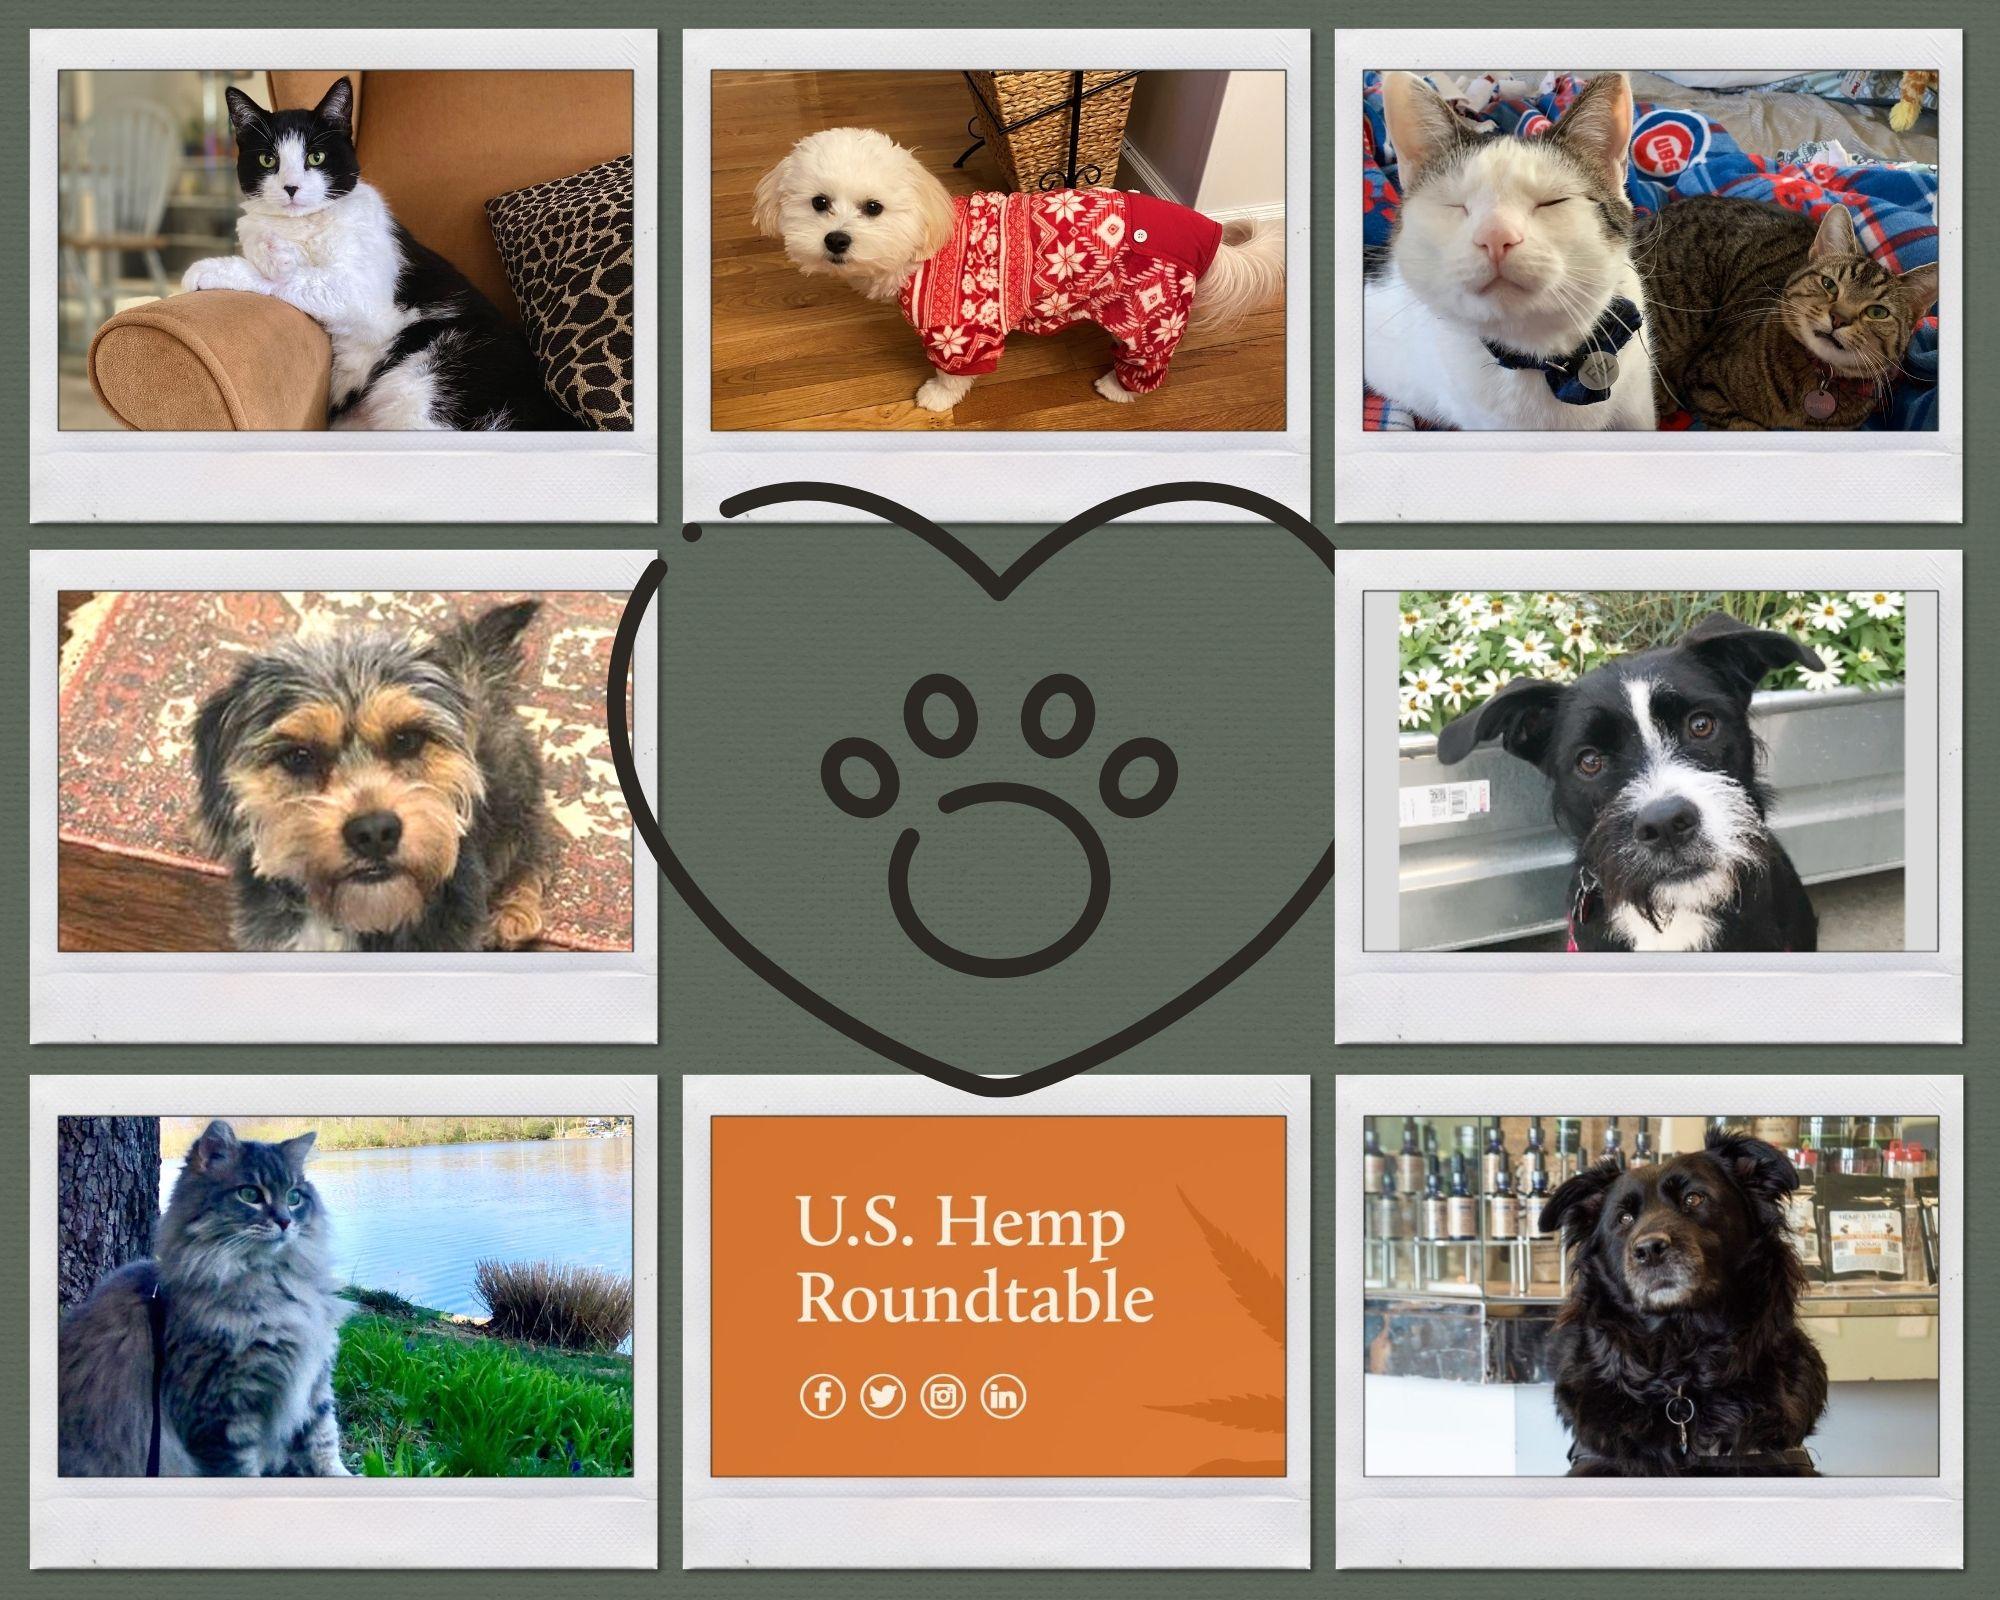 Cats or Dogs? Hemp is for both!